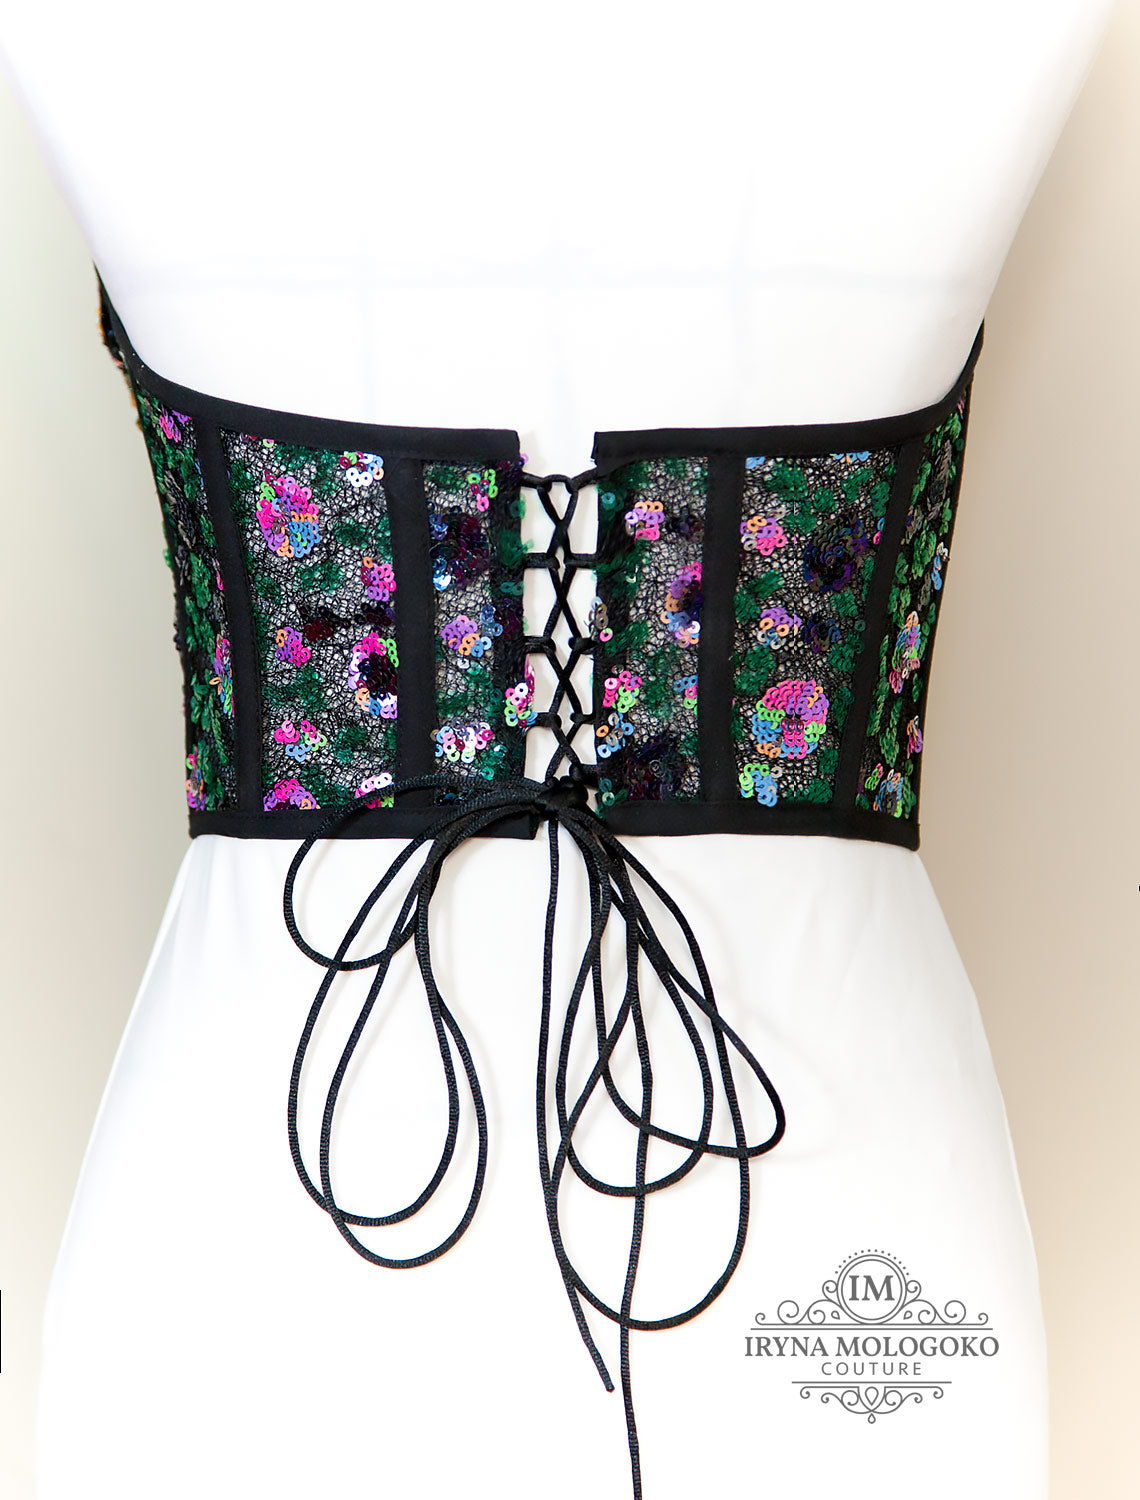 Blooming Garden Red Carpet Style Embroidered Rose Corset